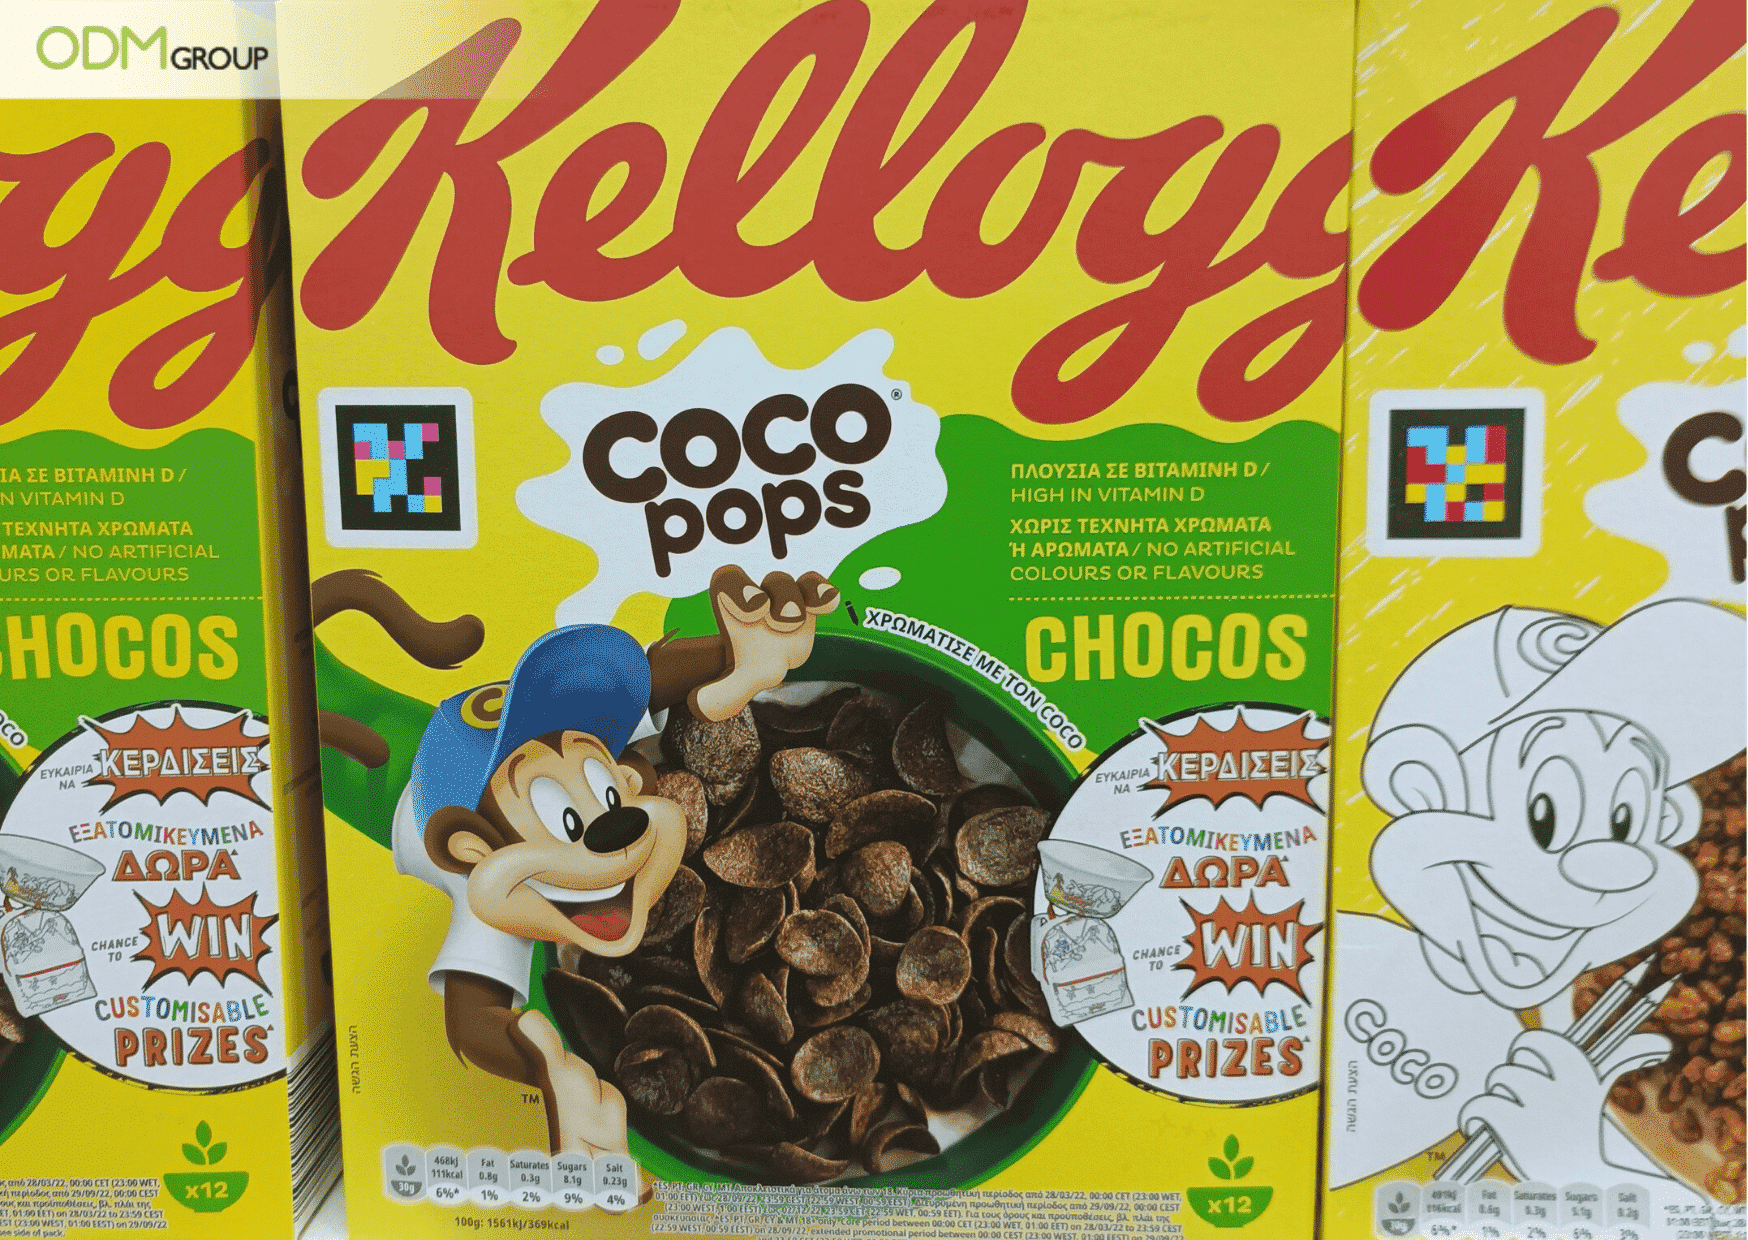 FeedYourImagination How Kellogg's Use Prize Promotion in Marketing